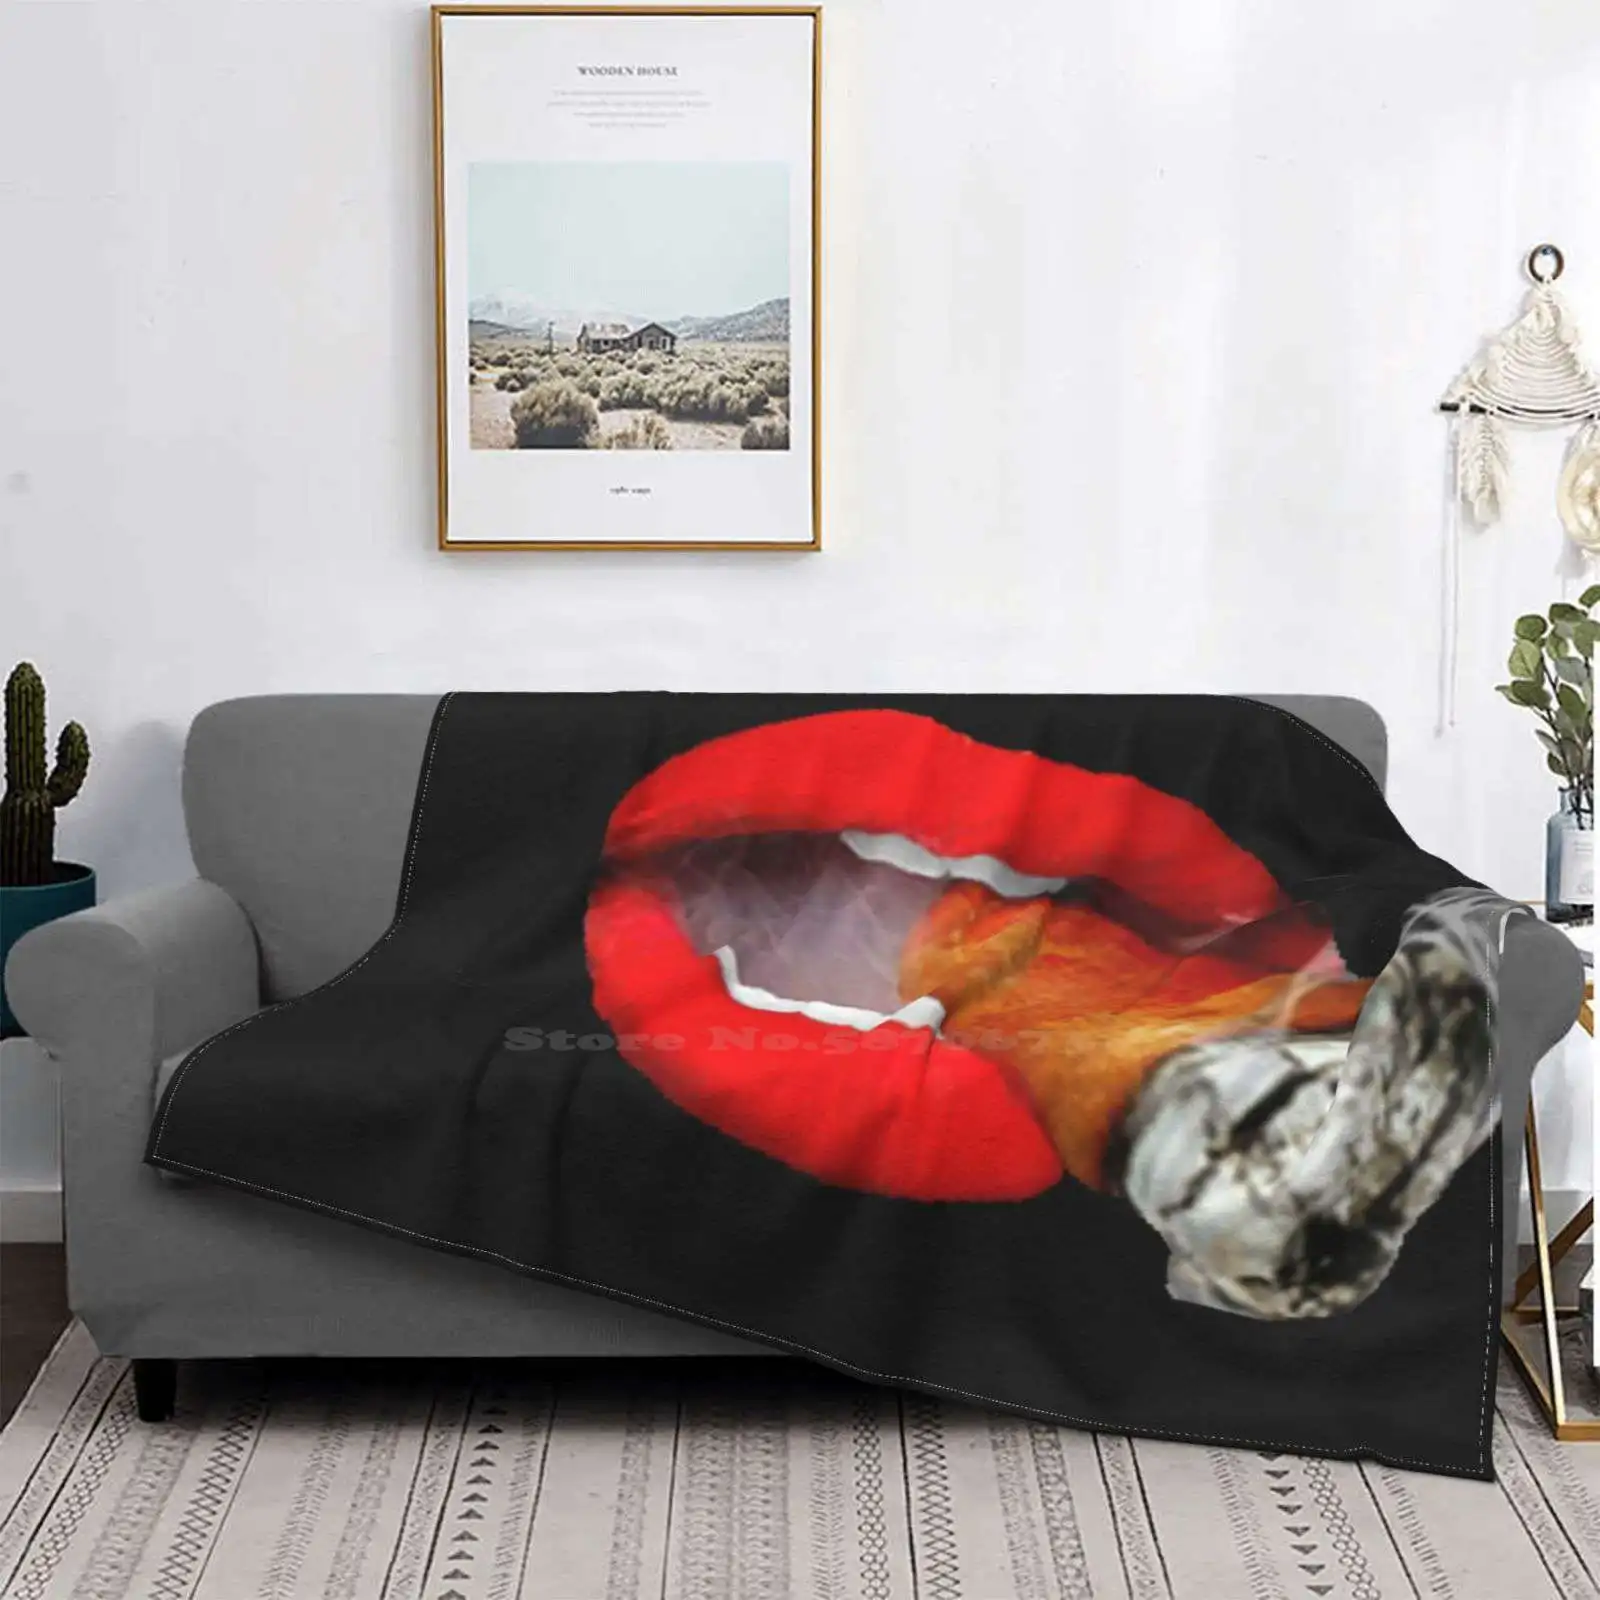 

Nutin Like A Stoggy Shaggy Throw Soft Warm Blanket Sofa / Bed / Travel Love Gifts Hlpina1 Mom New Recent Most Trending Favorite